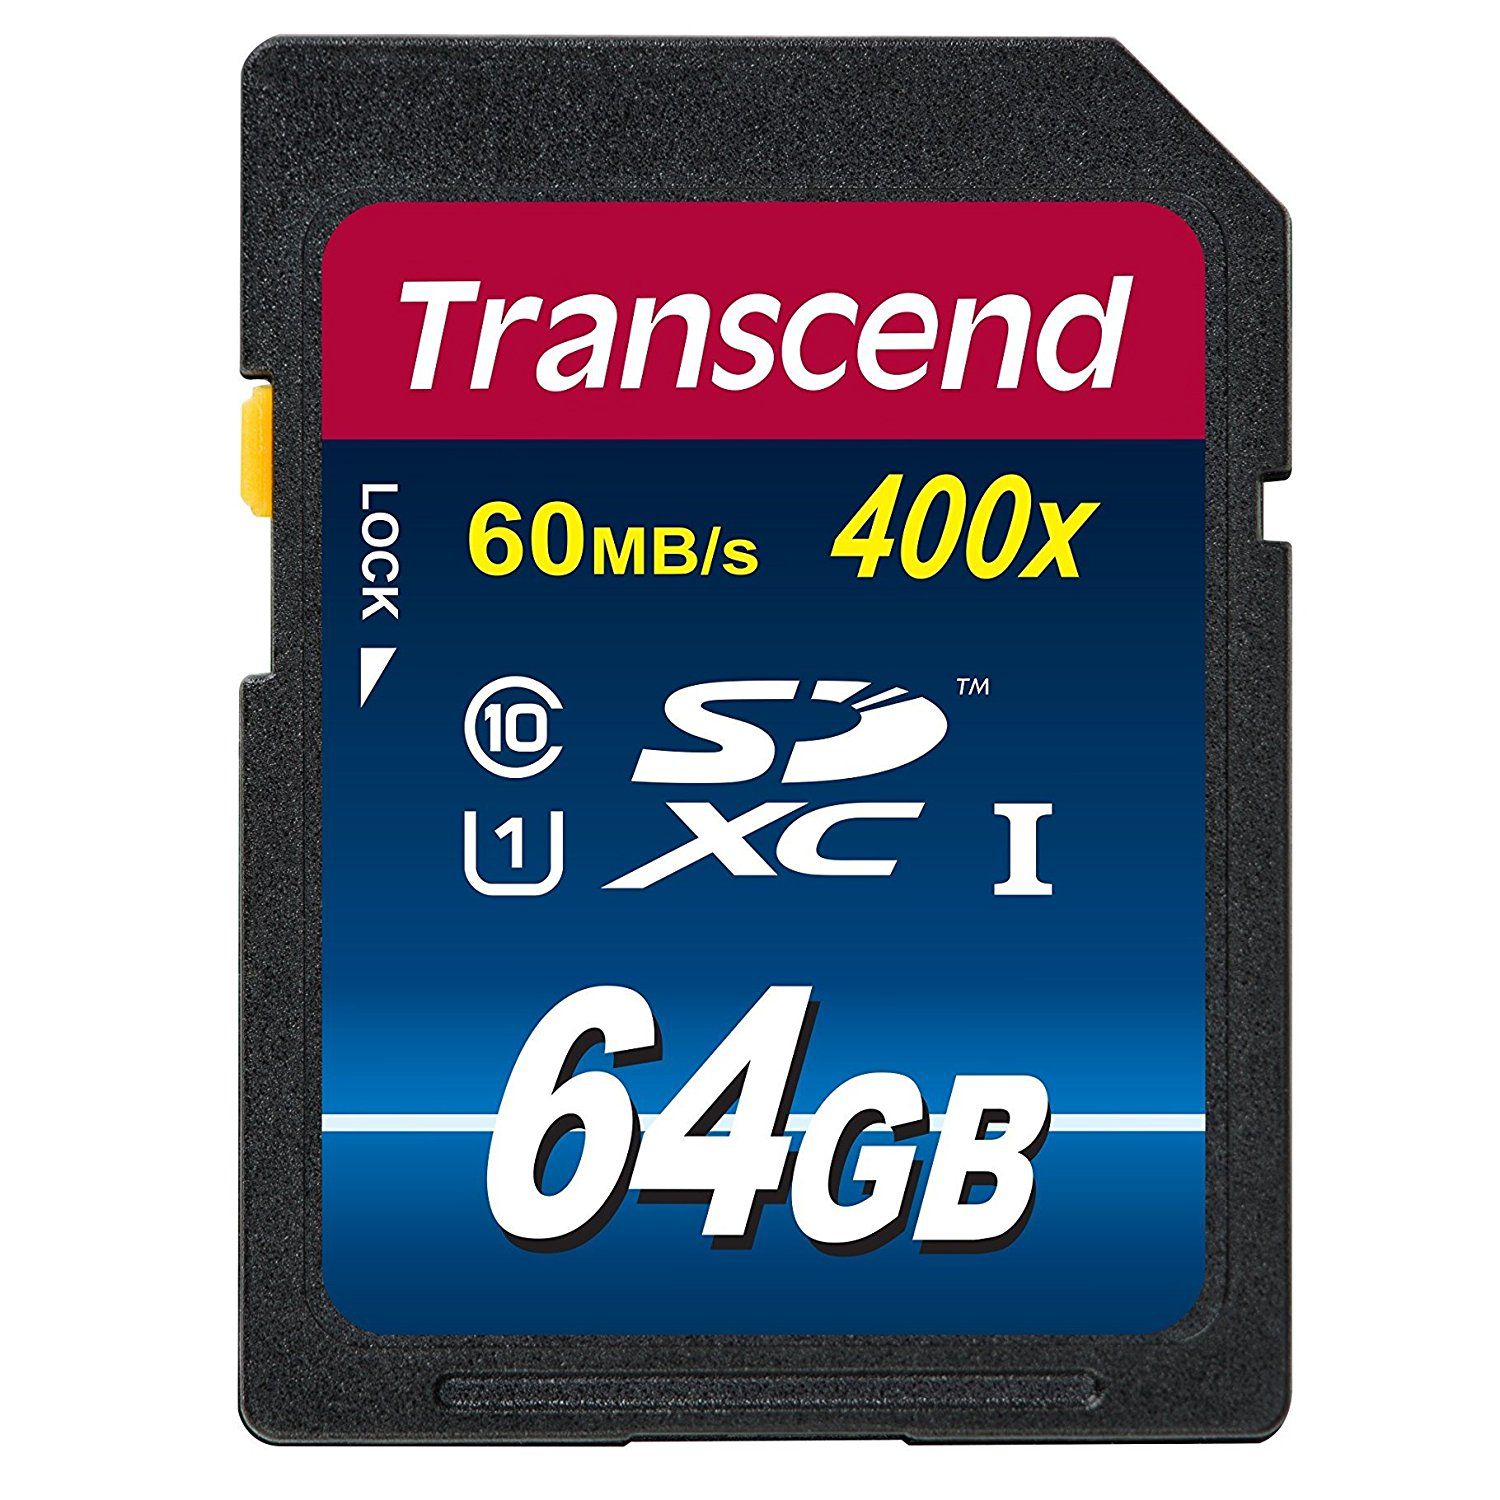     			Transcend 64GB SDXC Class 10 UHS-1 Flash Memory Card Up to 60MB/s (TS64GSDU1PE)